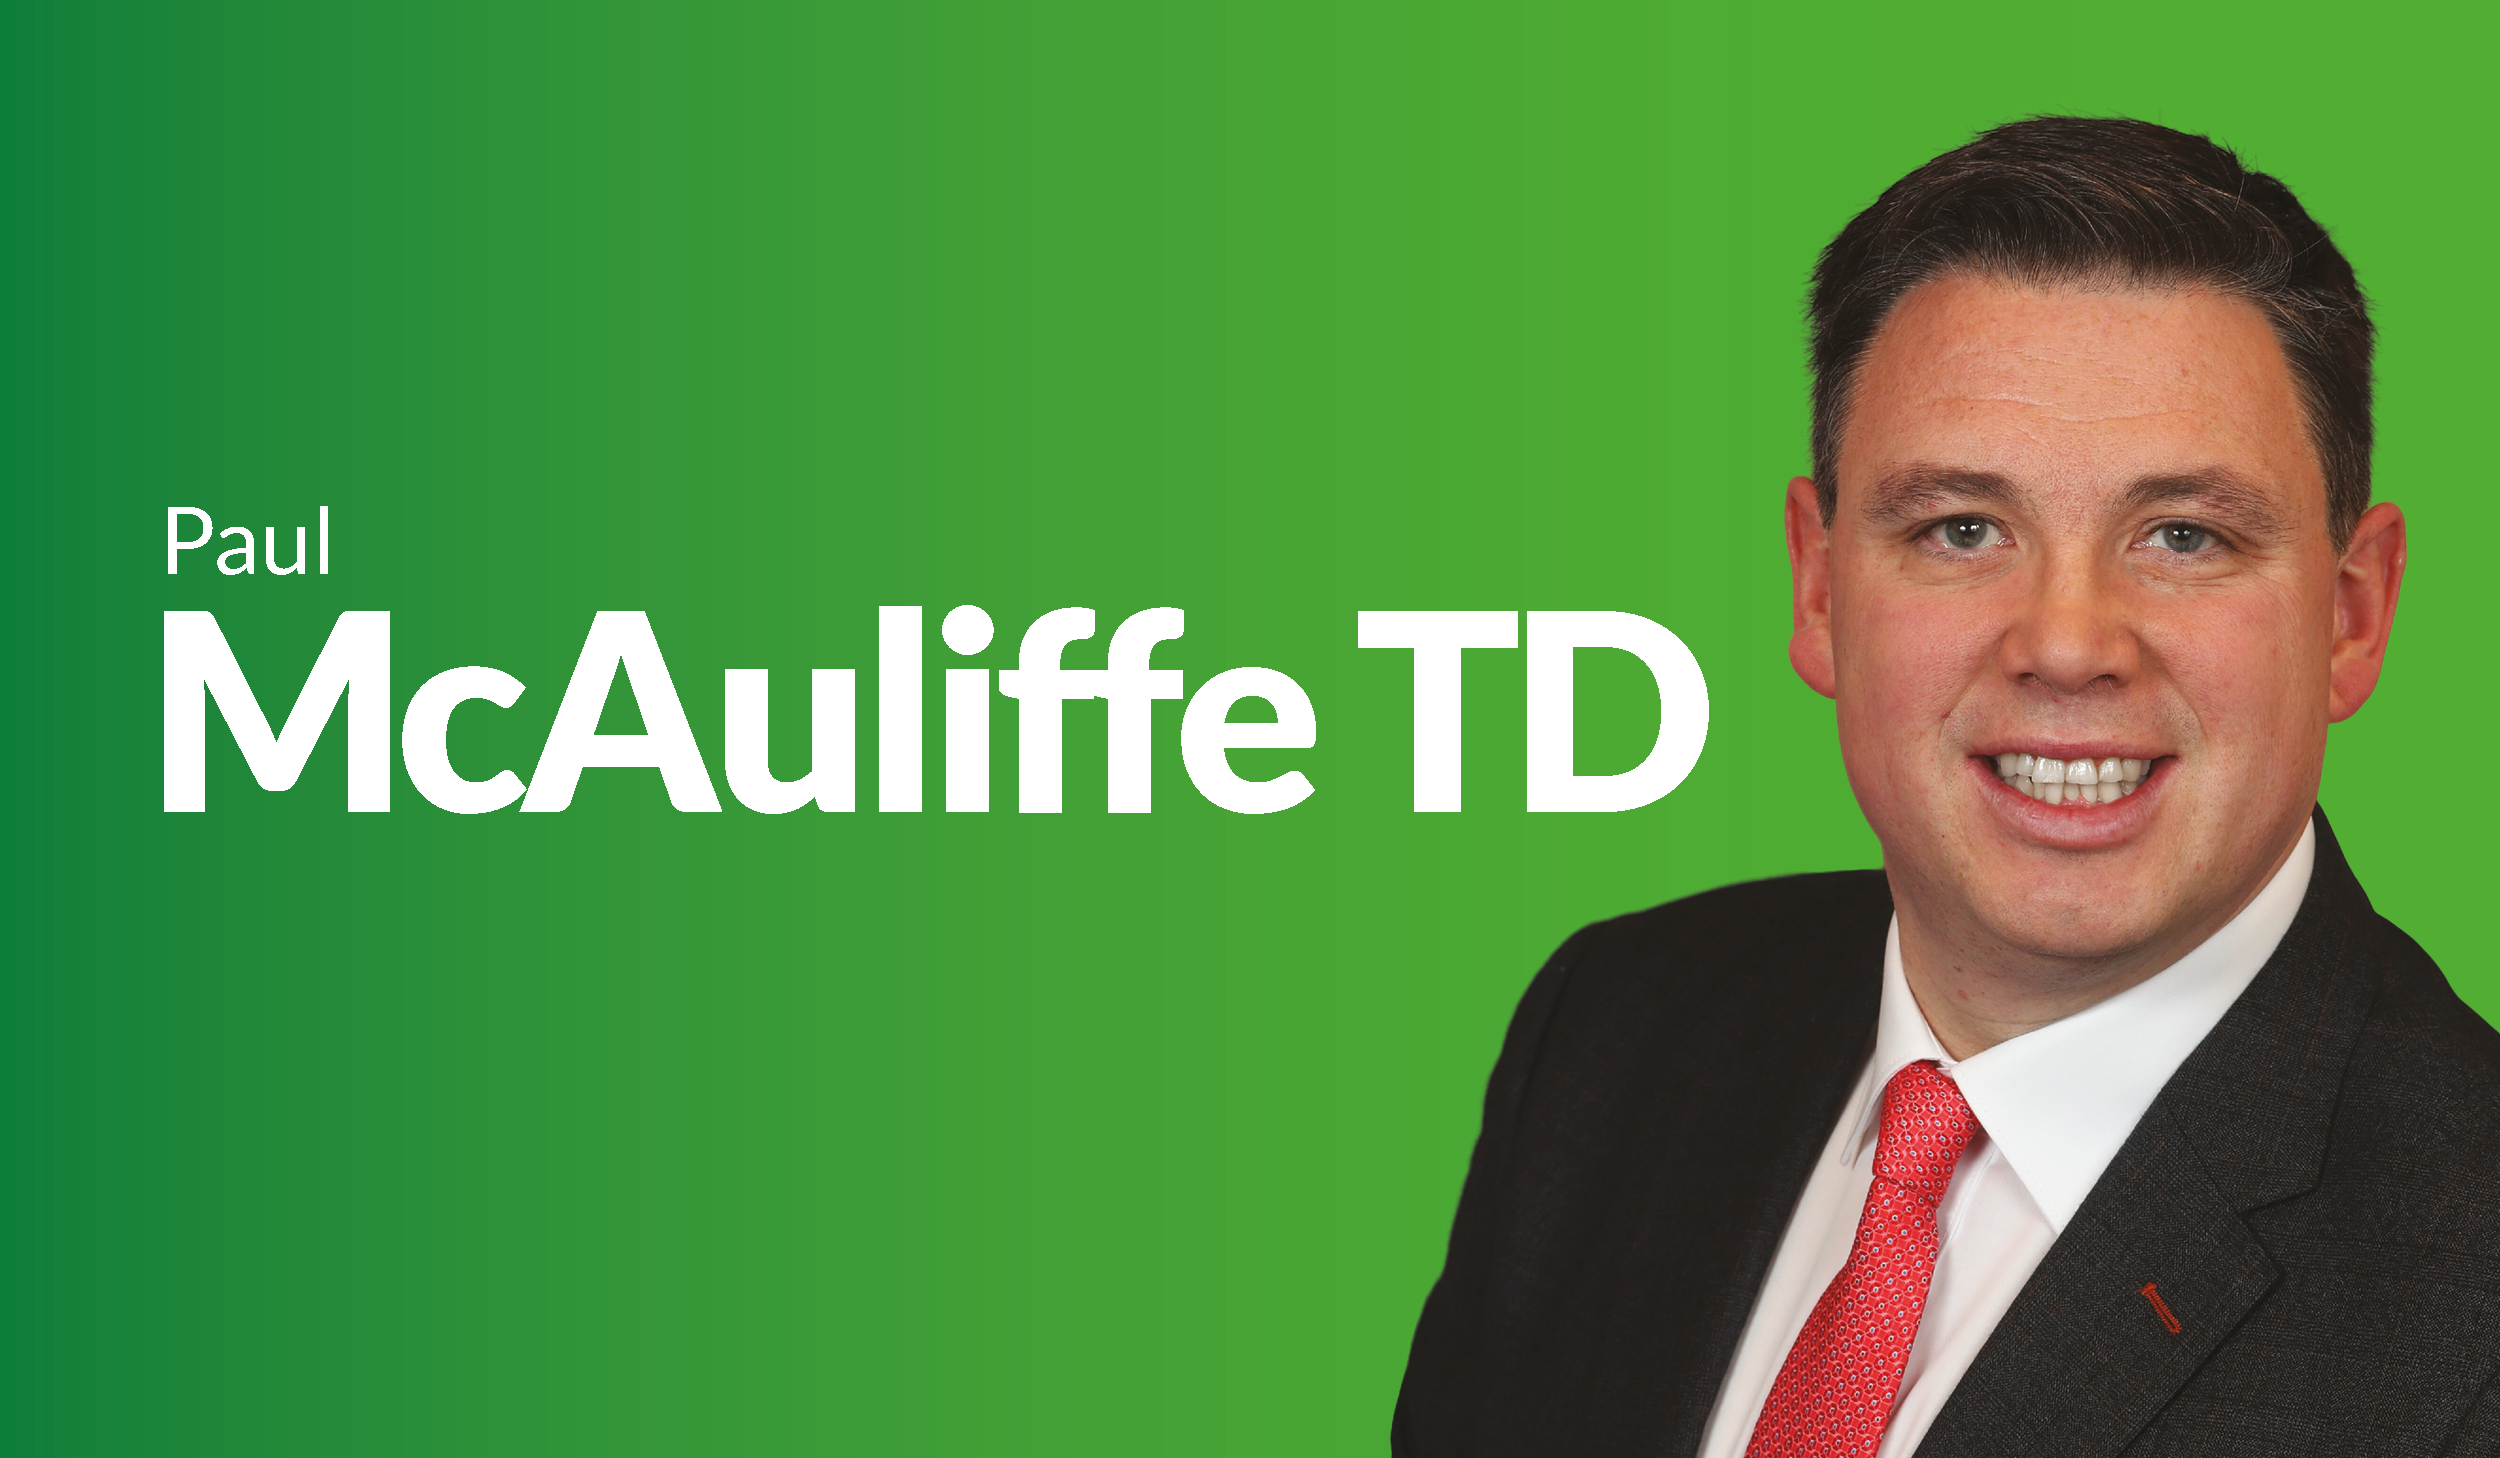 Dublin needs to clean up its act - McAuliffe